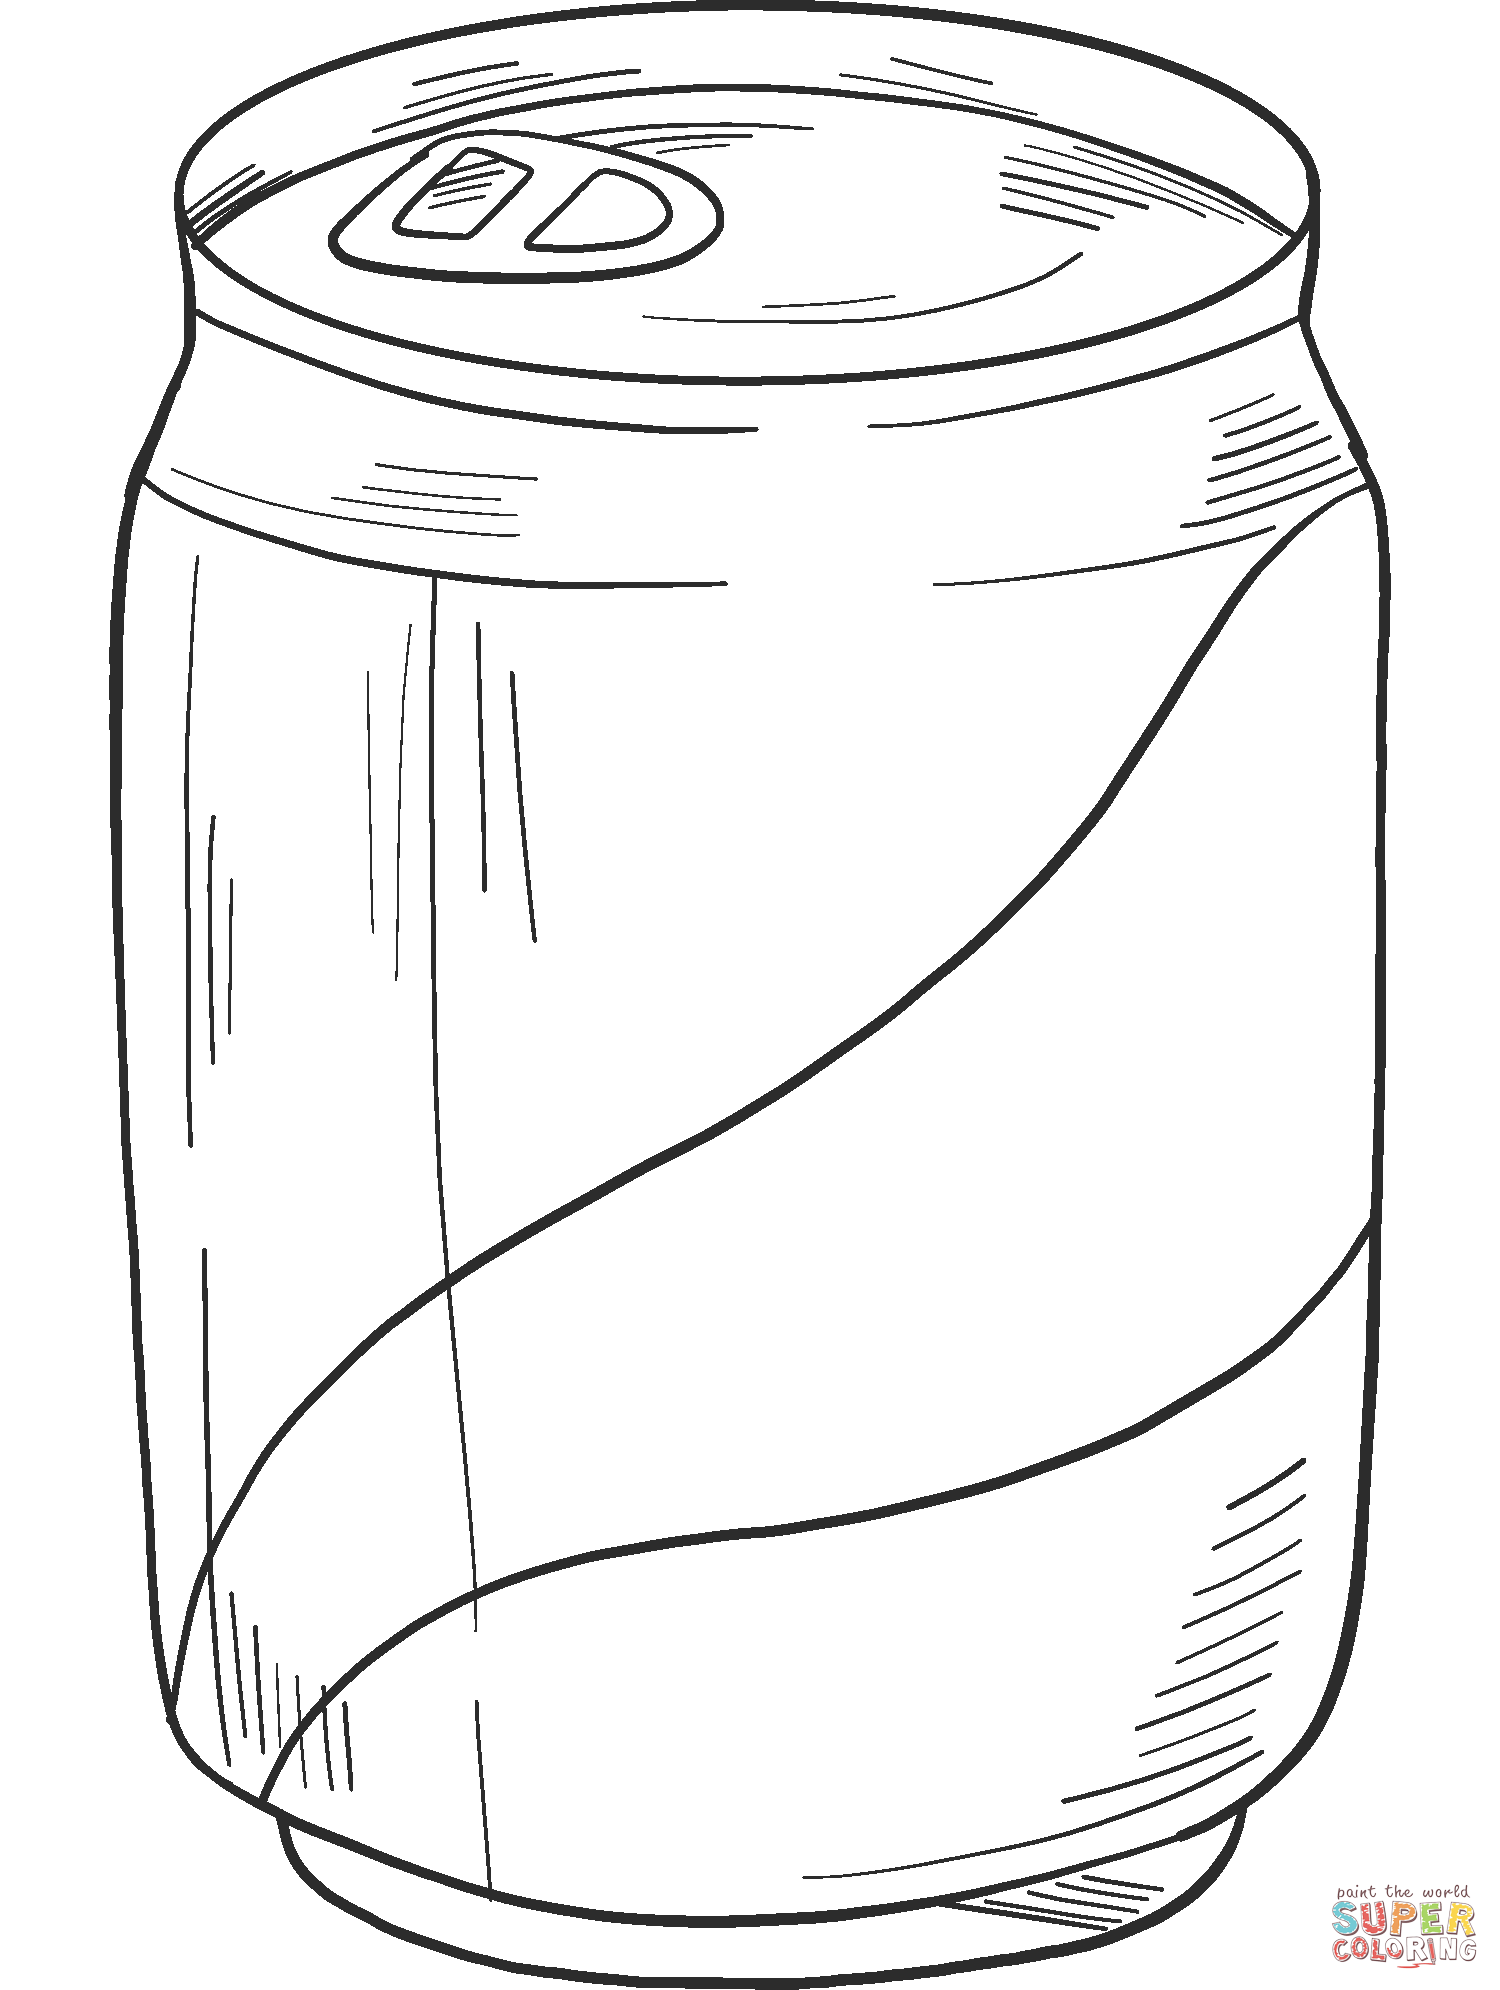 Soda can coloring page free printable coloring pages